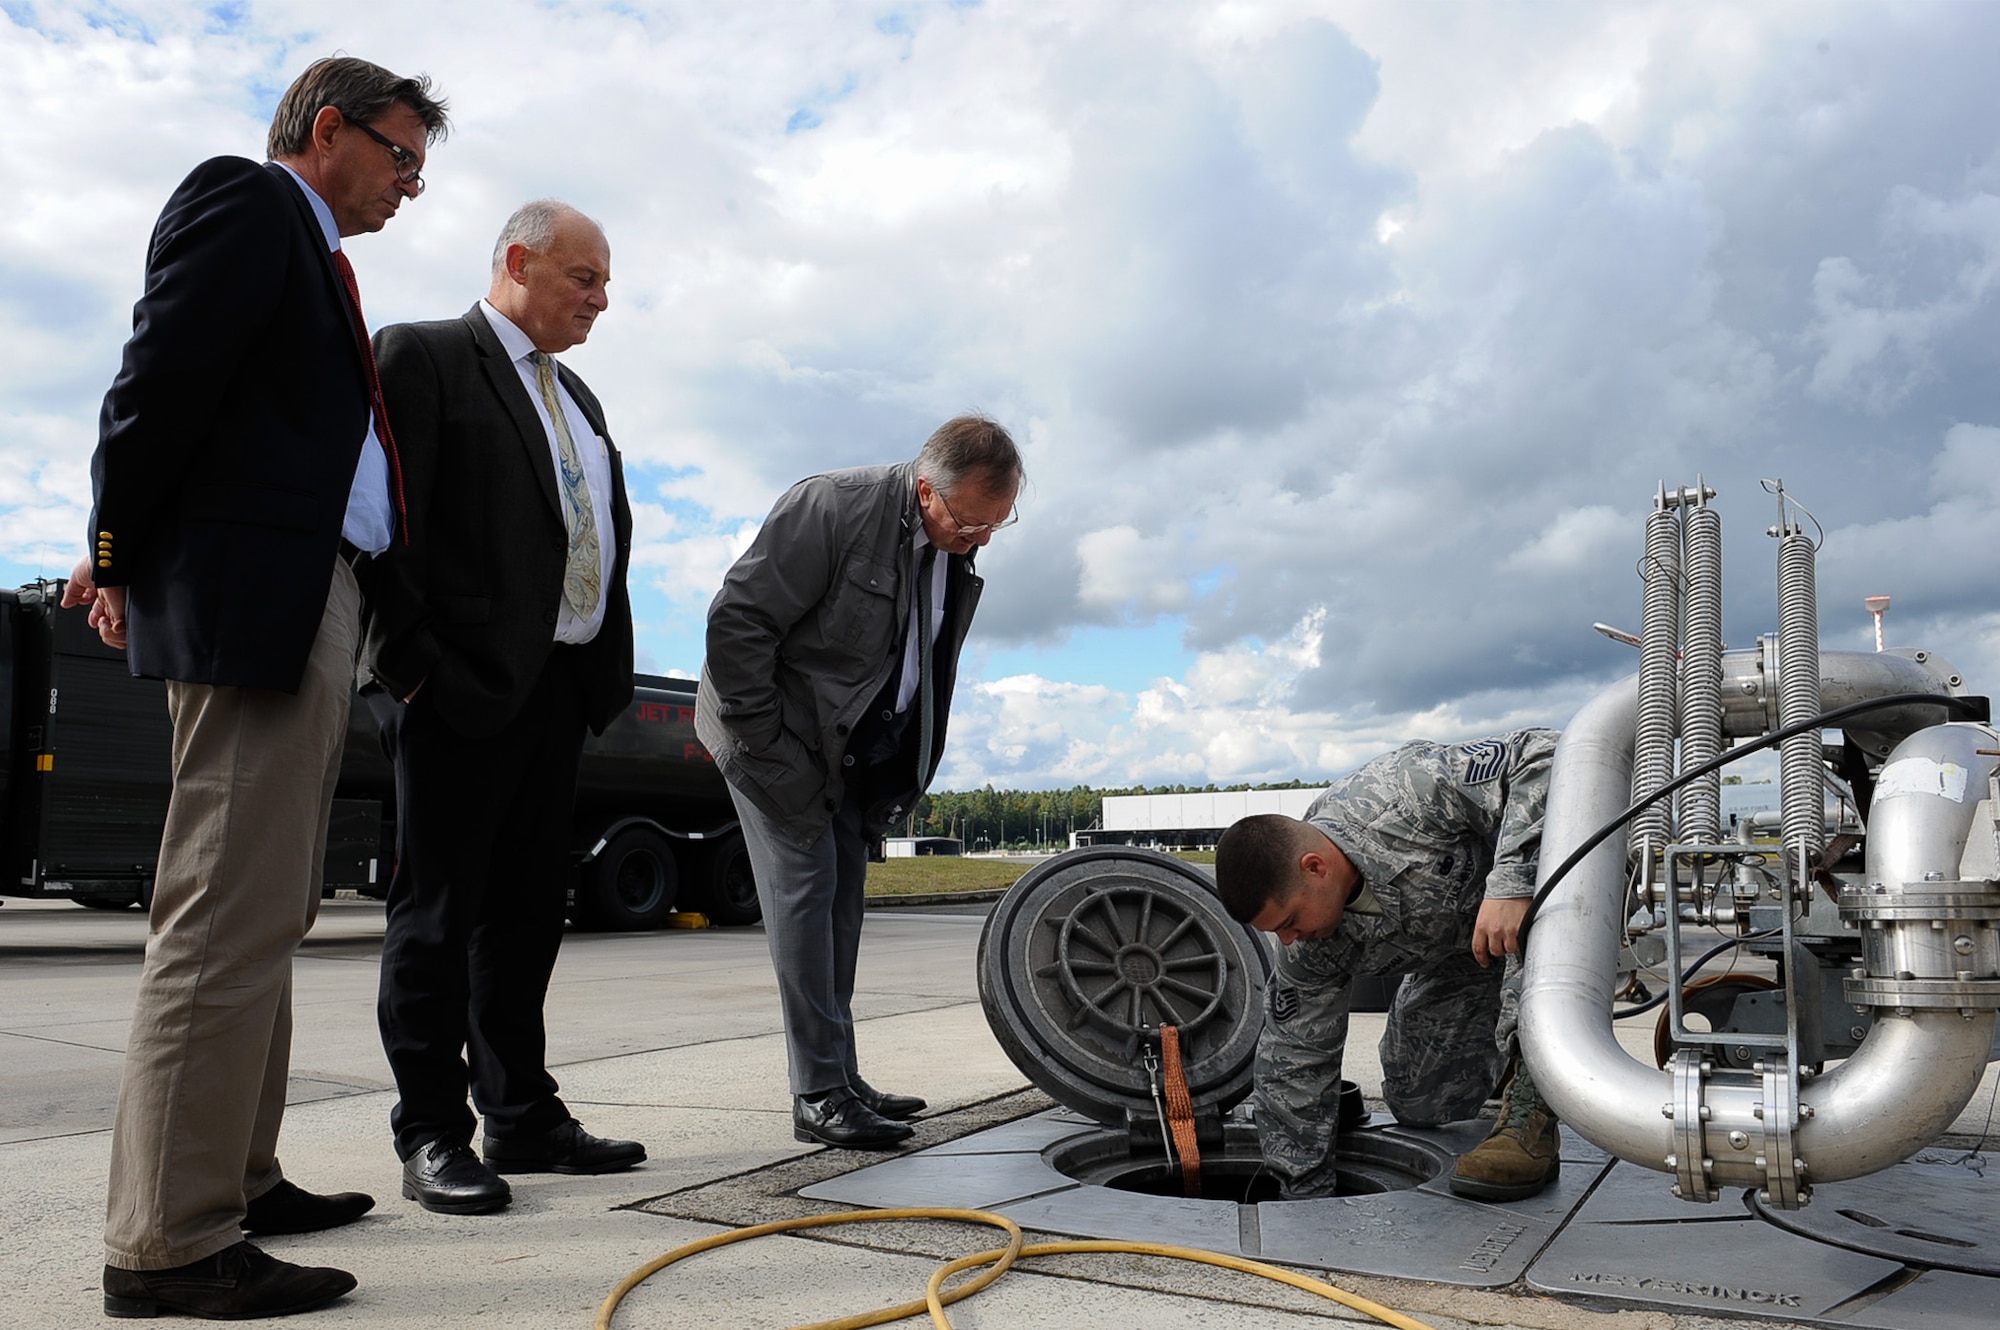 The Central Europe Pipeline System is the largest of the NATO pipeline systems and is designed and managed to meet operational requirements in Central Europe. The NATO Pipeline Tour precedes the 60th anniversary of the CEPS, which will occur in 2018.